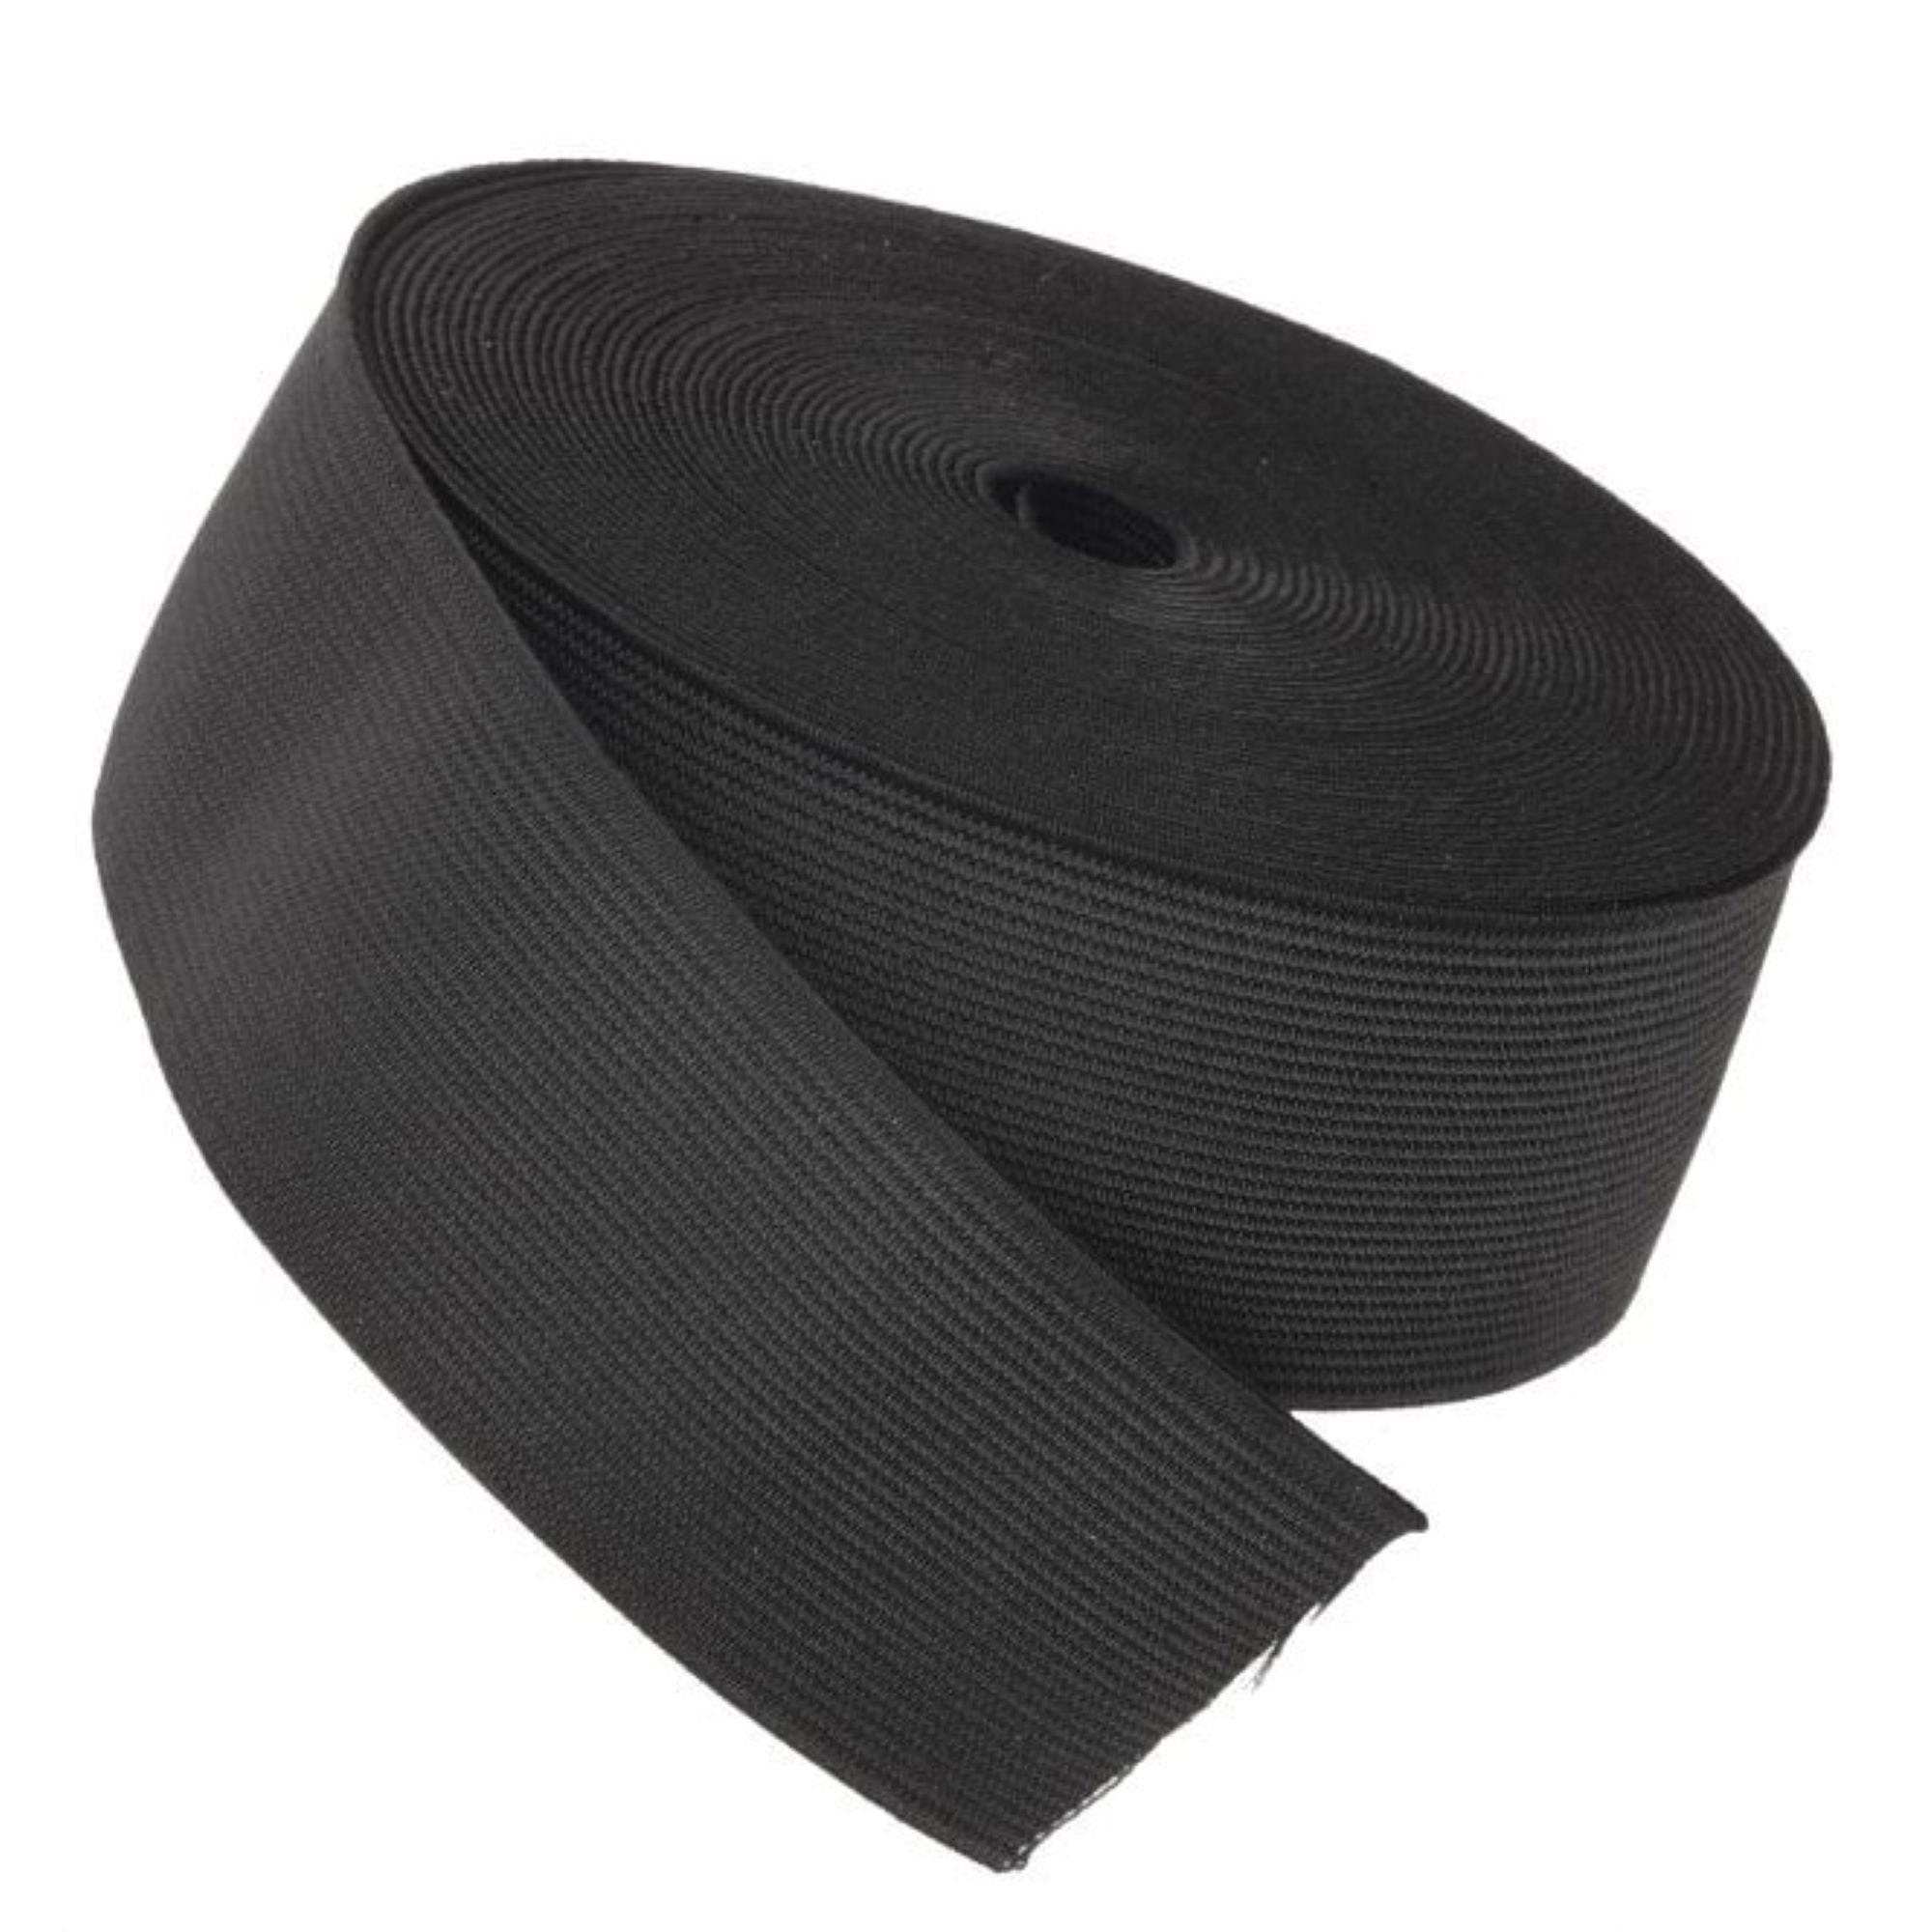 Double-Sided, Anti-Slip Soft, Stretch Wig Elastic Band for Attachment in  Wig Making - 1 Inch Wide X 32 Inches Long